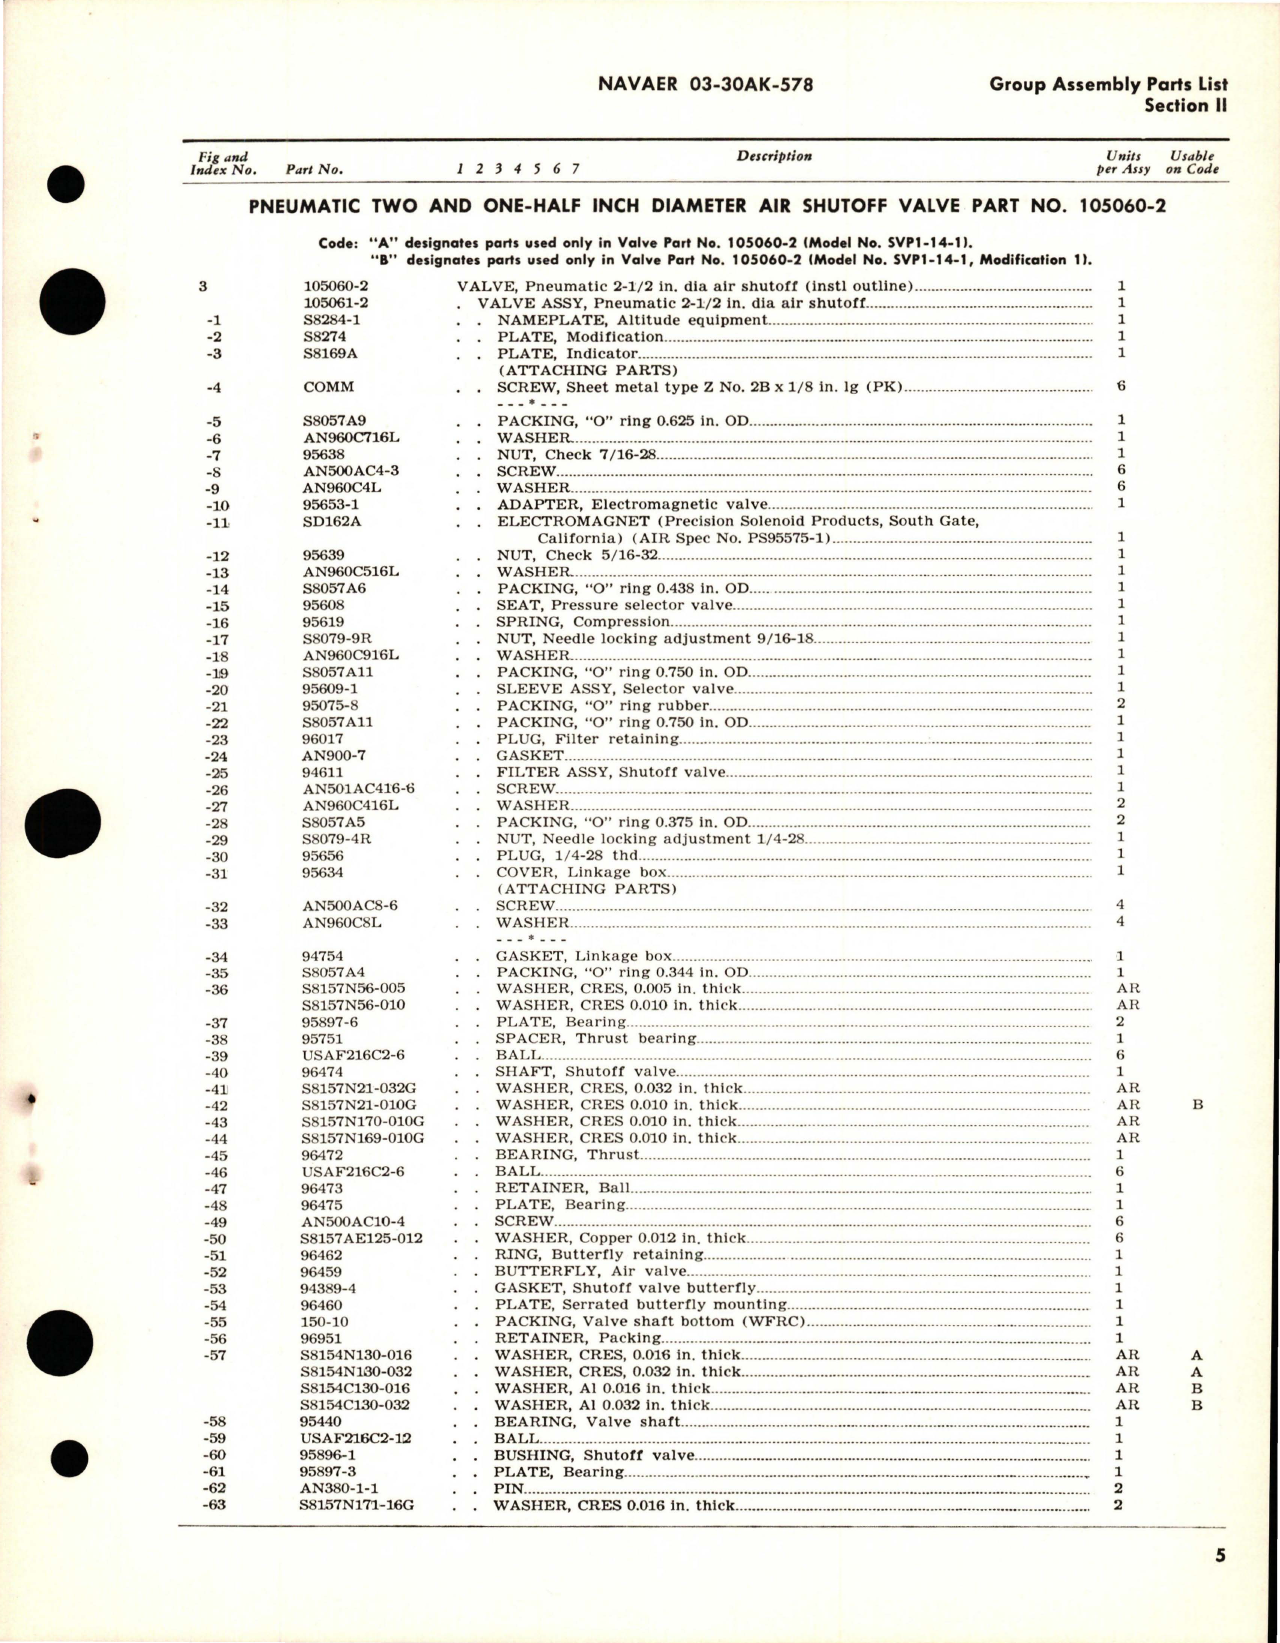 Sample page 7 from AirCorps Library document: Illustrated Parts Breakdown for Pneumatic Air Shutoff Valves 